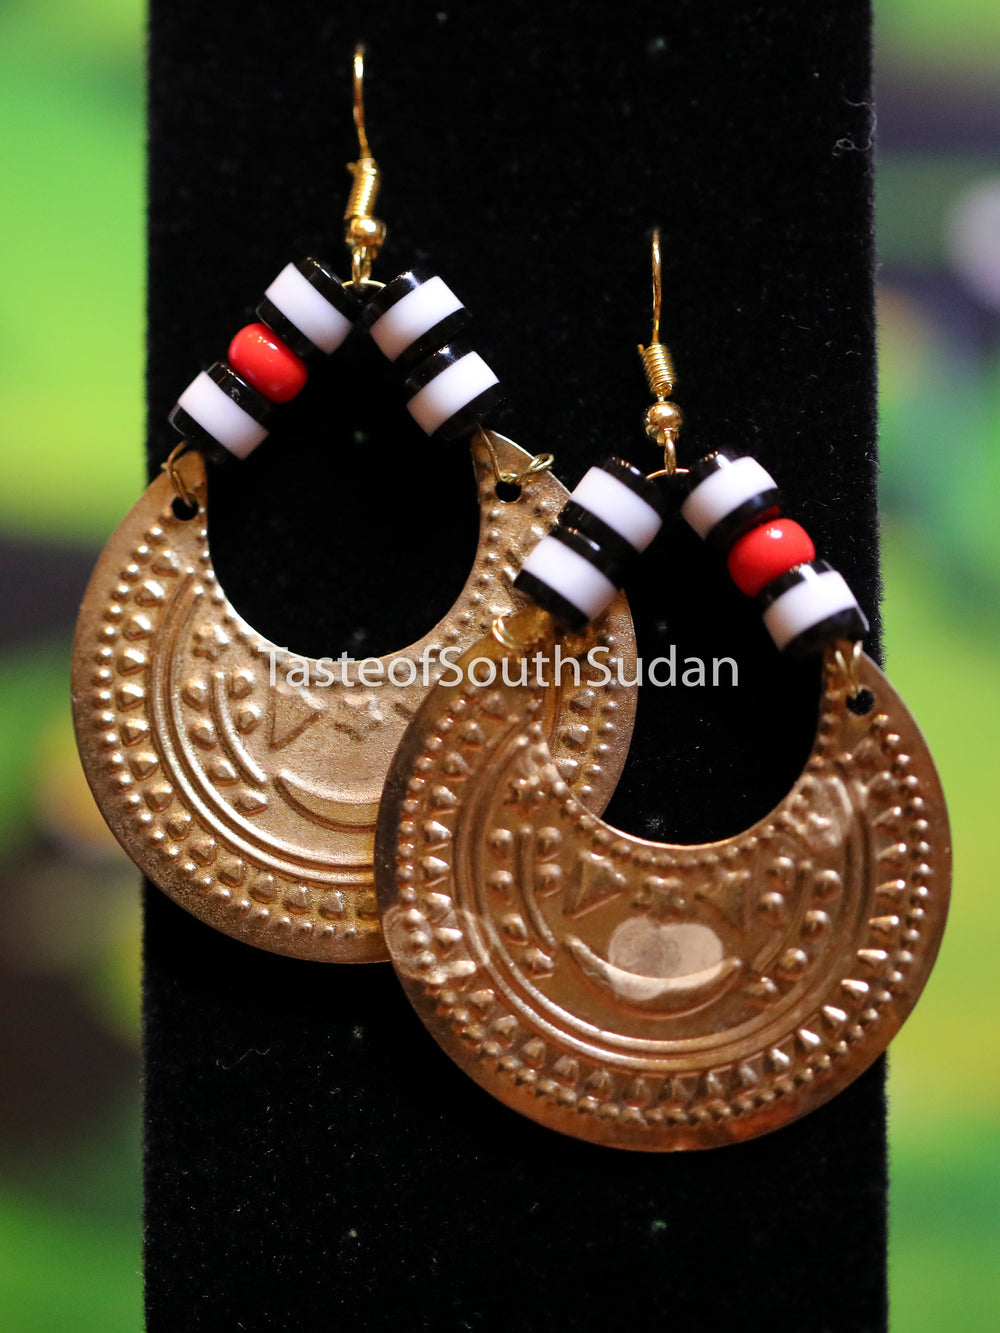 Authentic African Beaded Earrings Red, white and black glass beads and gold moon charm.  Hand made by women in South Sudan using traditional beading techniques passed down generations.  Sudanese hilal earrings.